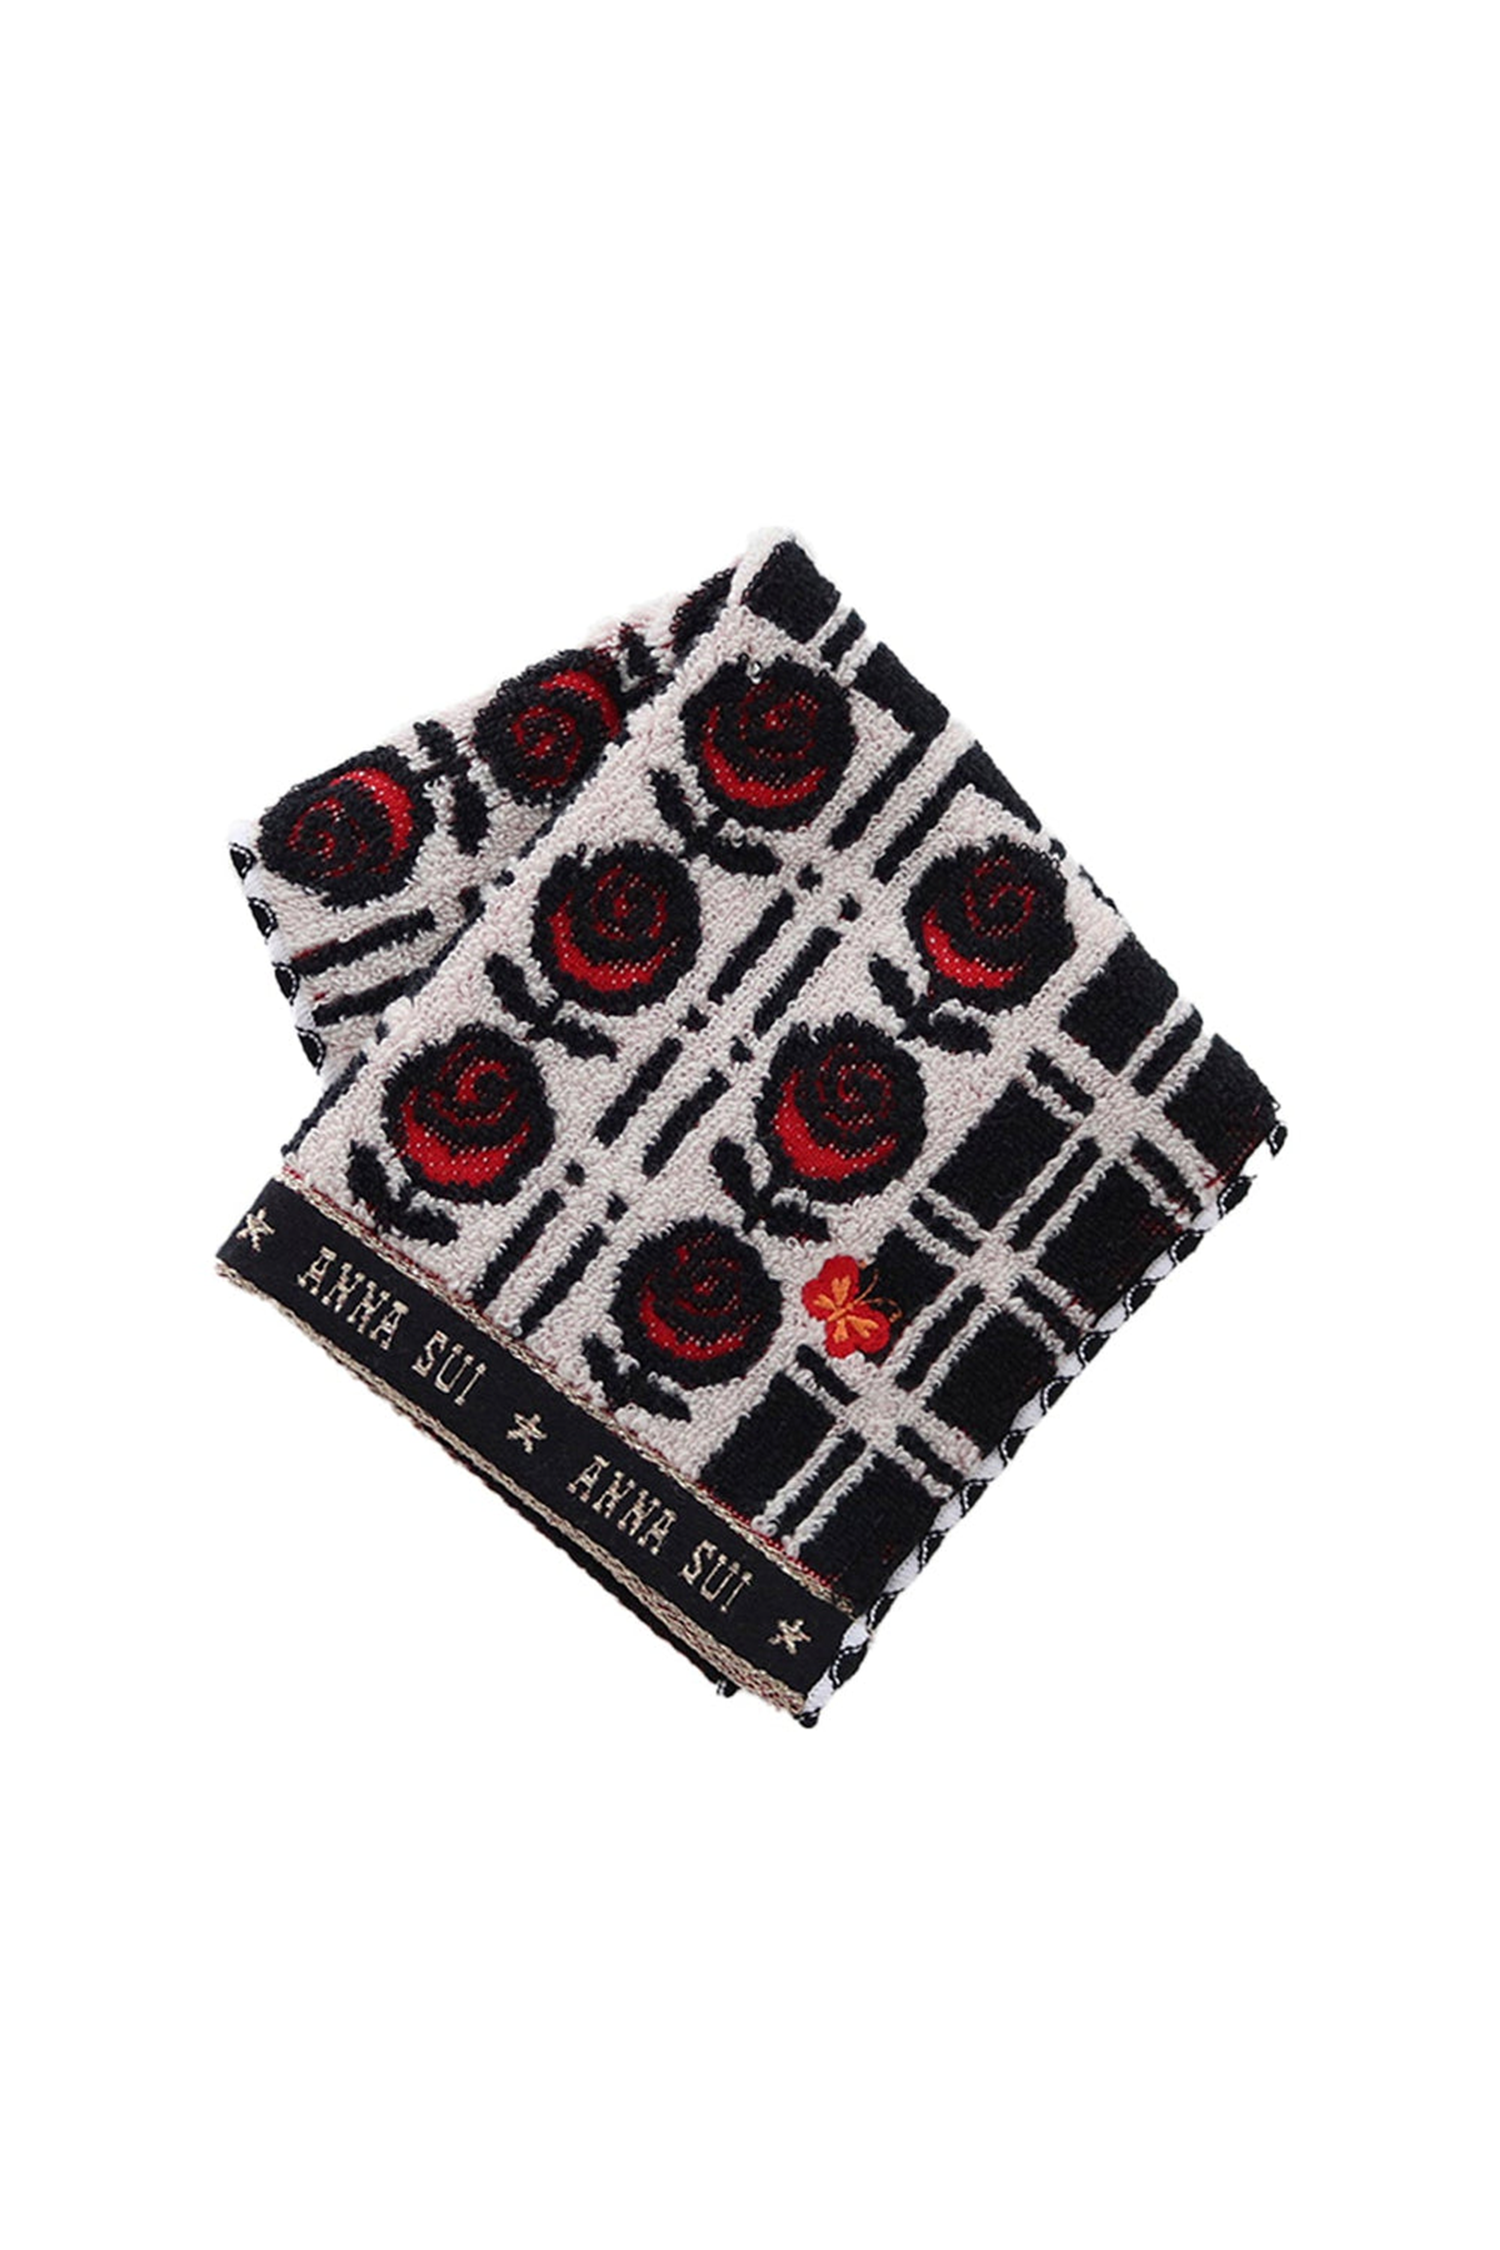 Washcloth, red roses on white, black border at bottom white Anna Sui's signature, res butterfly